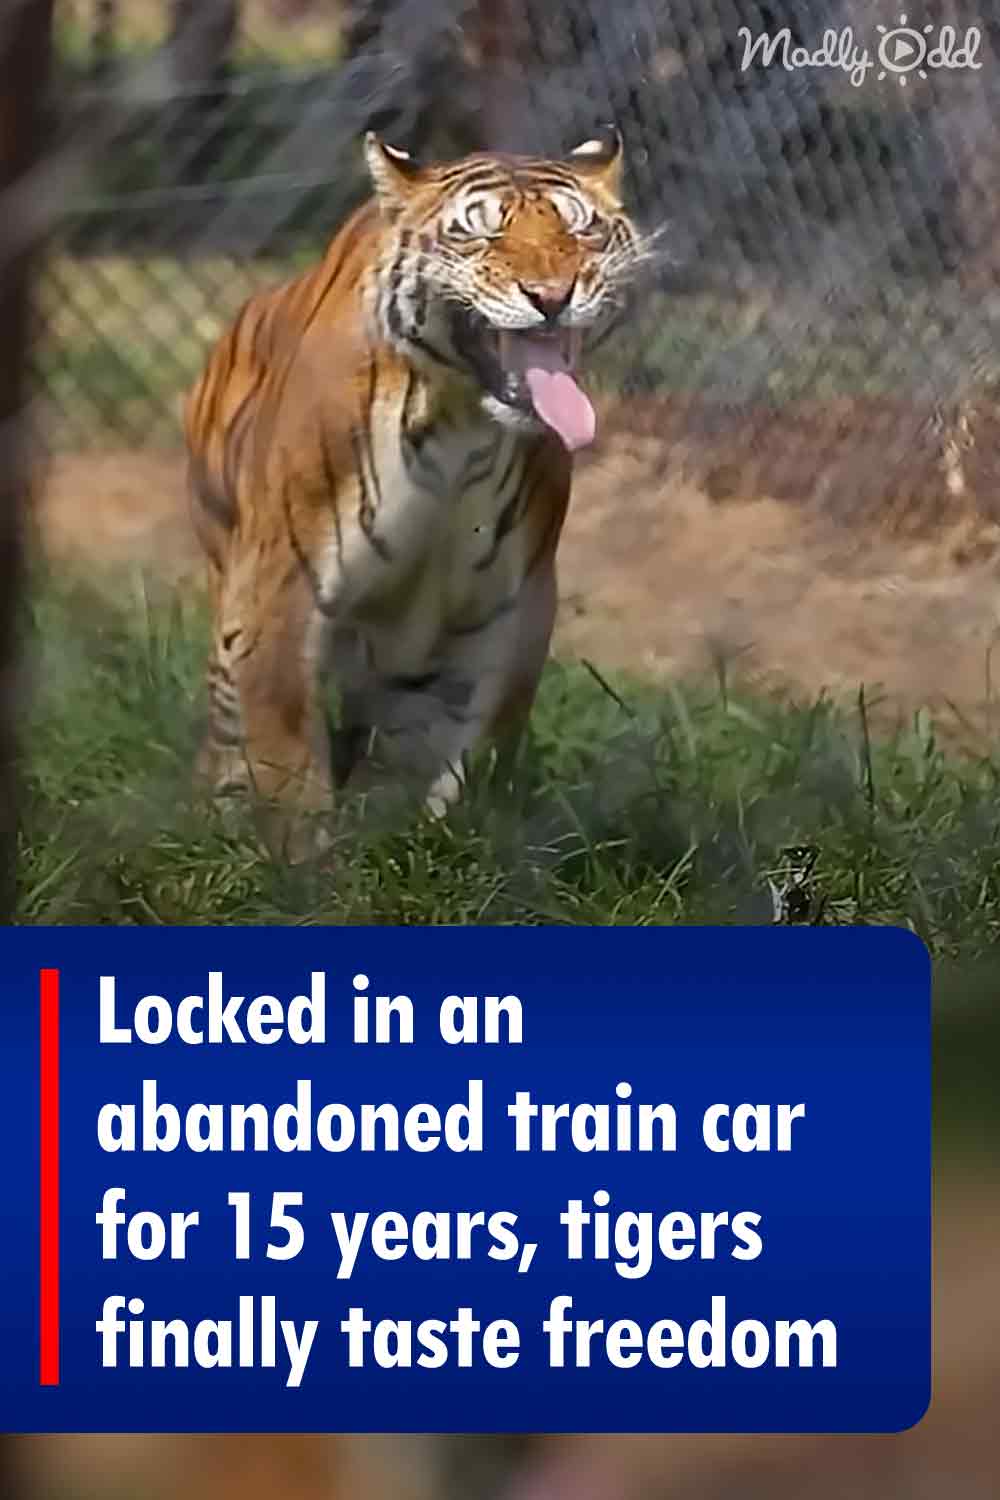 Locked in an abandoned train car for 15 years, tigers finally taste freedom